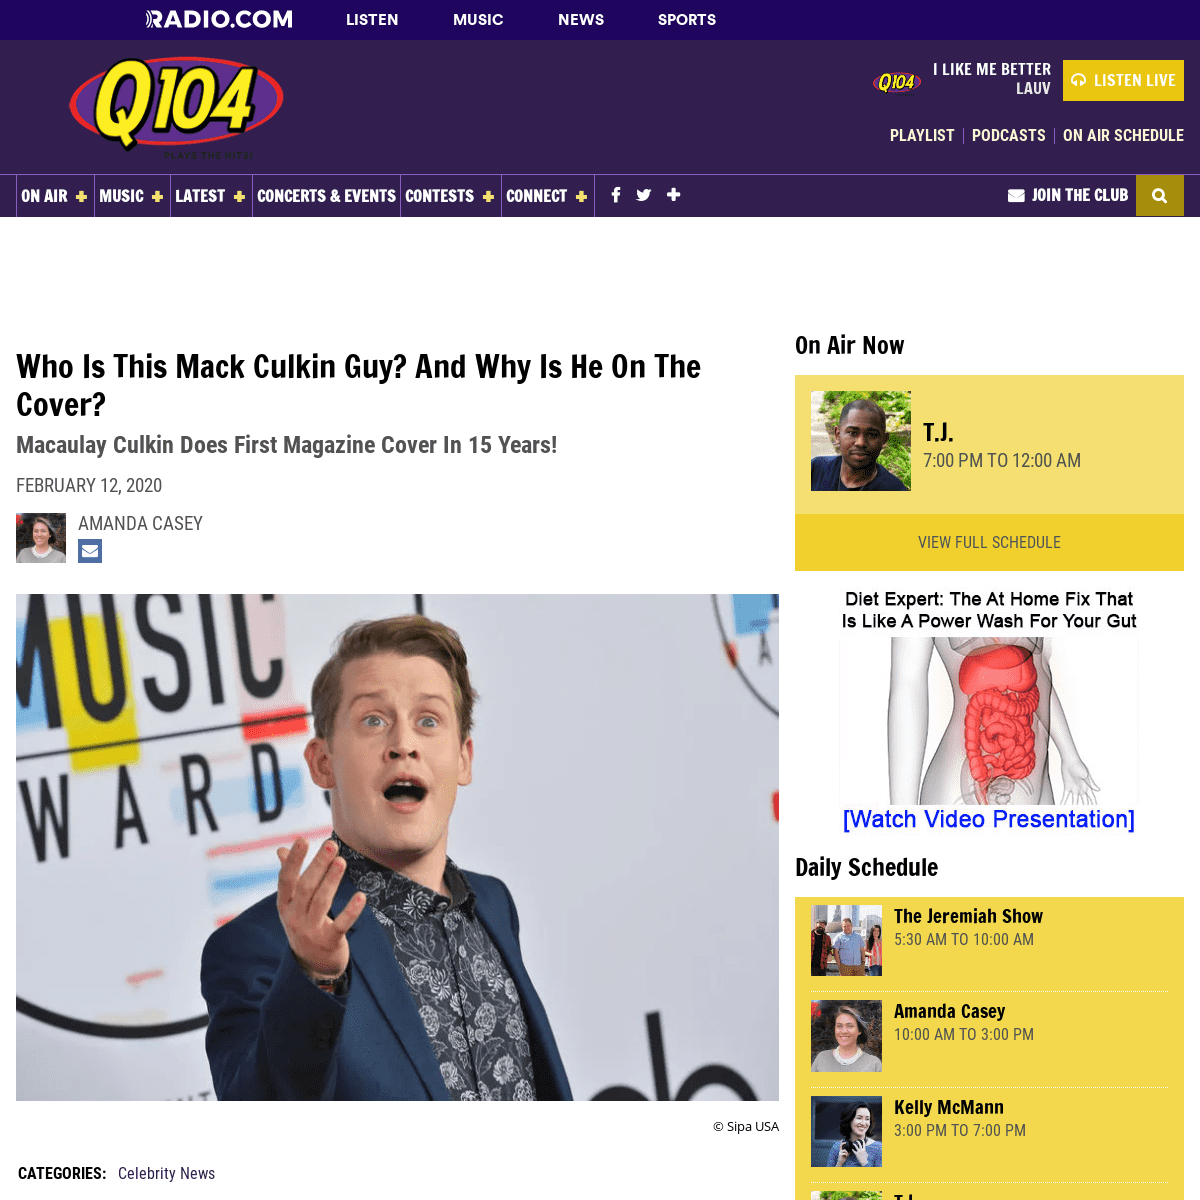 A complete backup of q104.radio.com/blogs/amanda-casey/who-is-this-mack-culkin-guy-and-why-is-he-on-the-cover